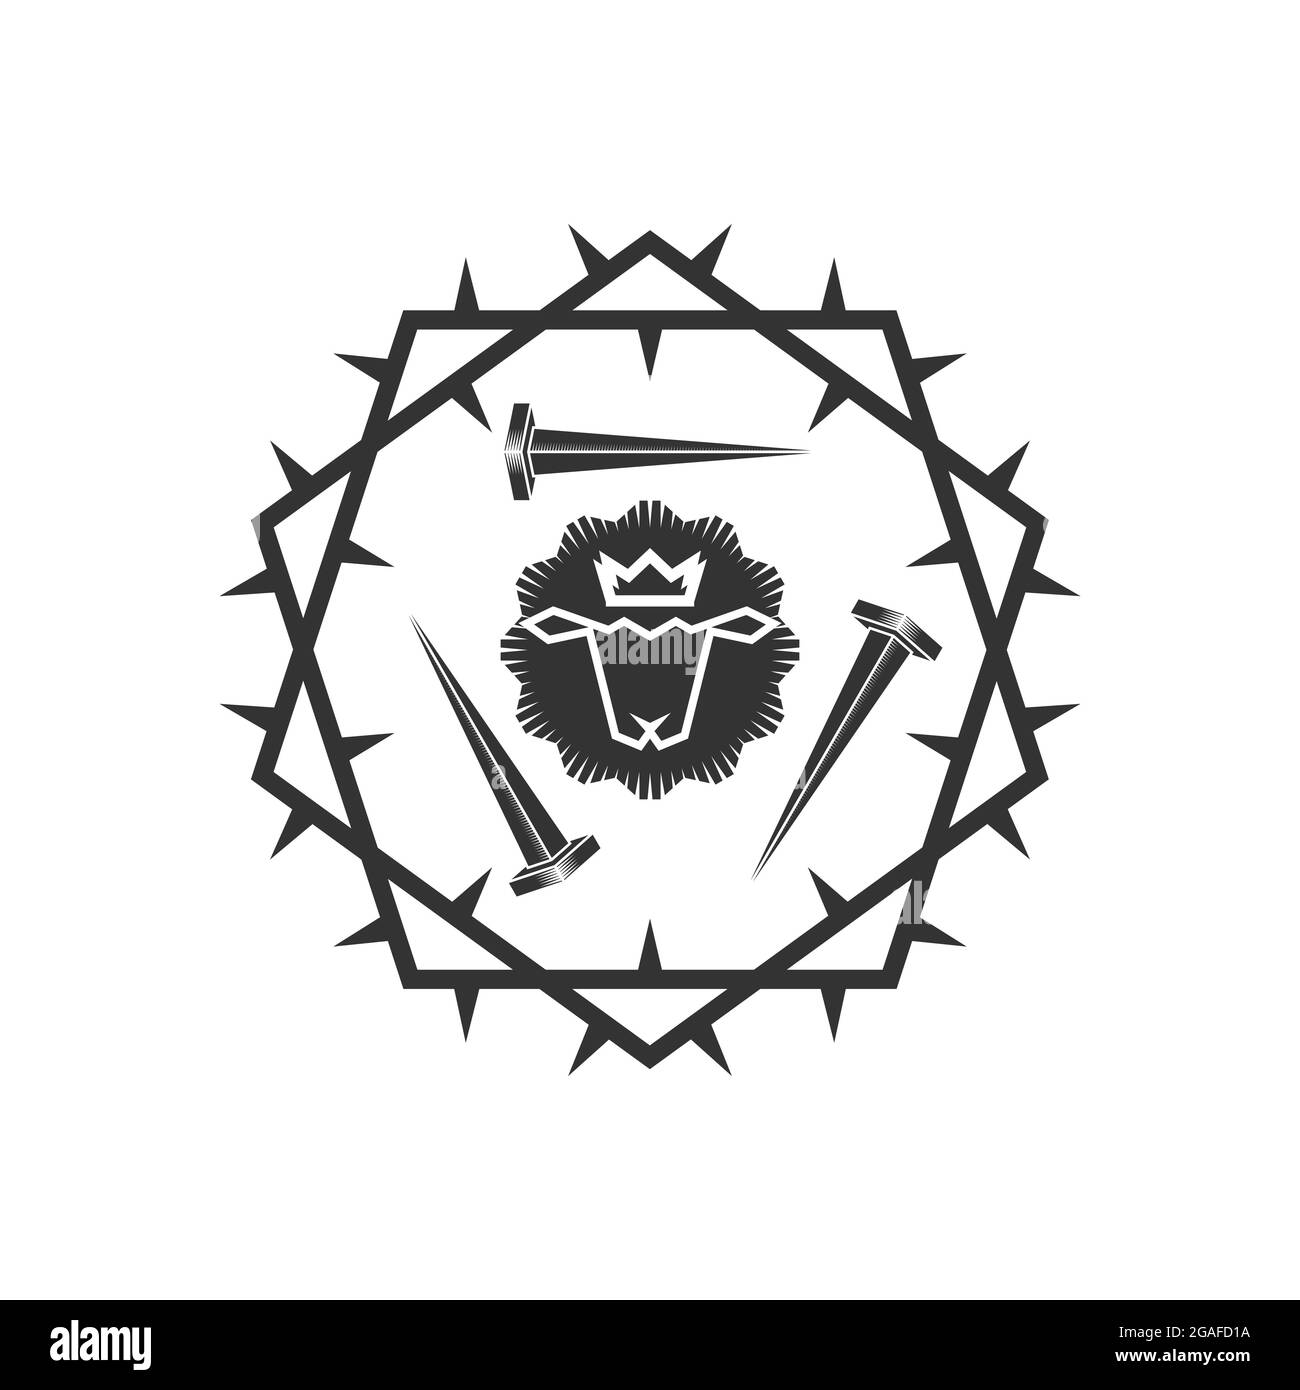 Christian illustration. Church logo. Lamb of God in a crown and framed with a crown of thorns. Stock Vector